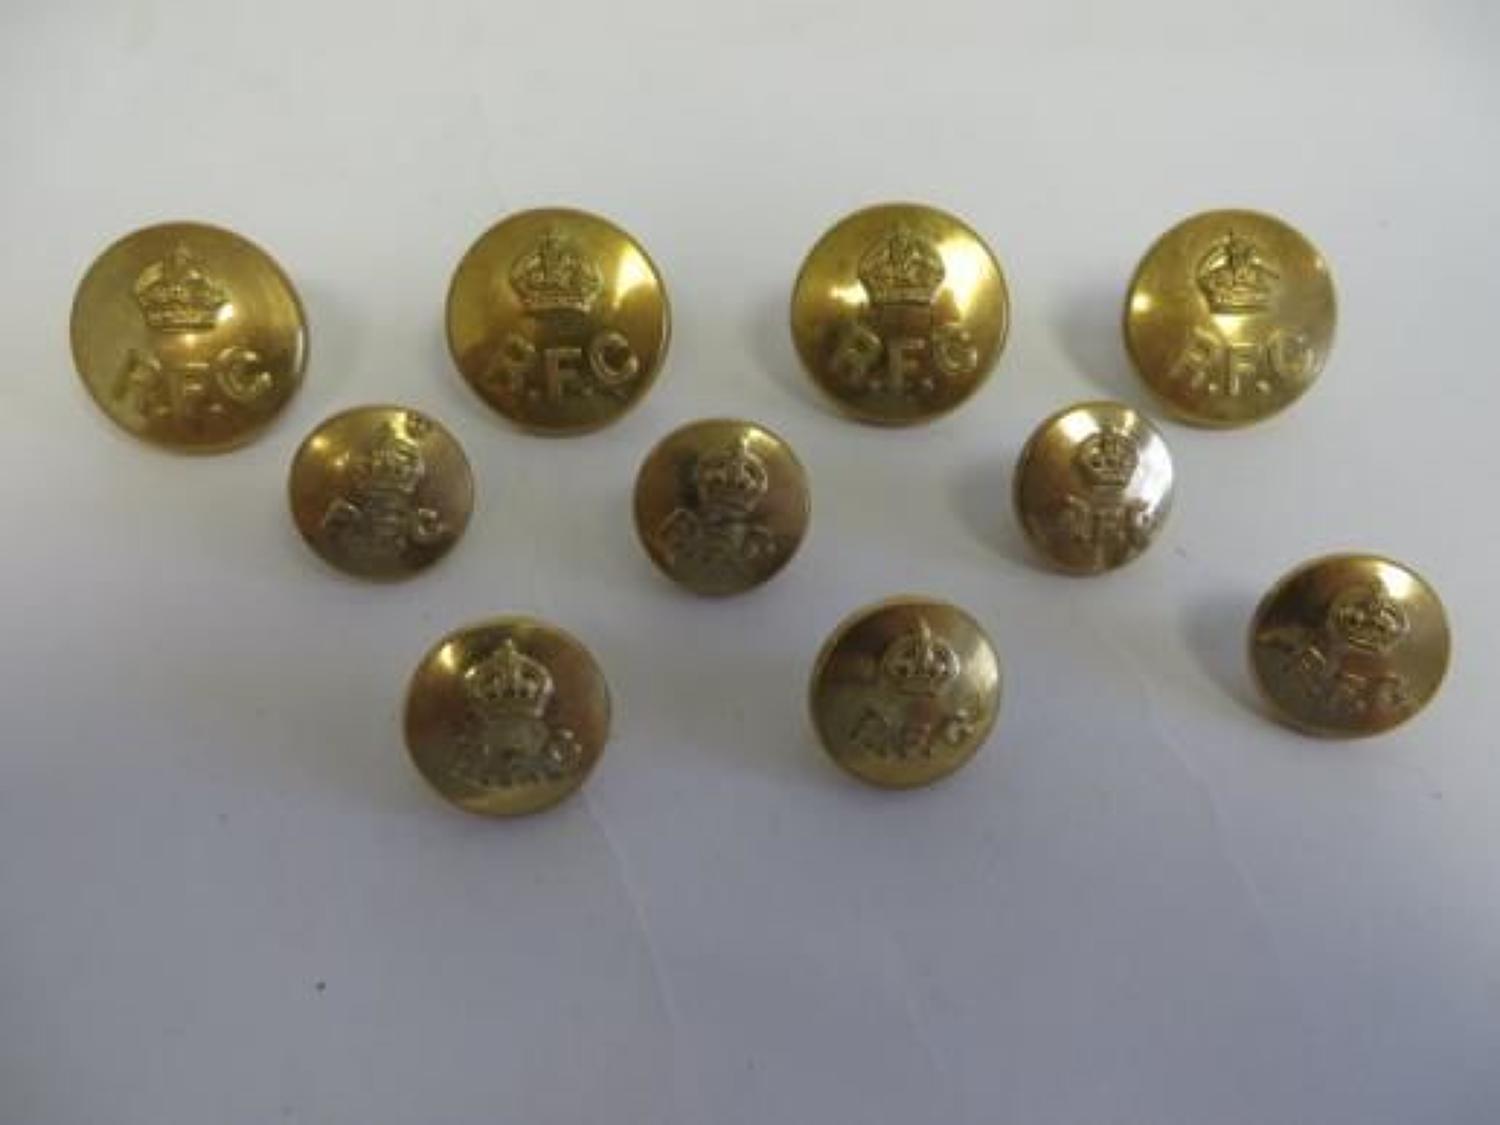 Good Complete Original set of Royal Flying Corps Officers Buttons